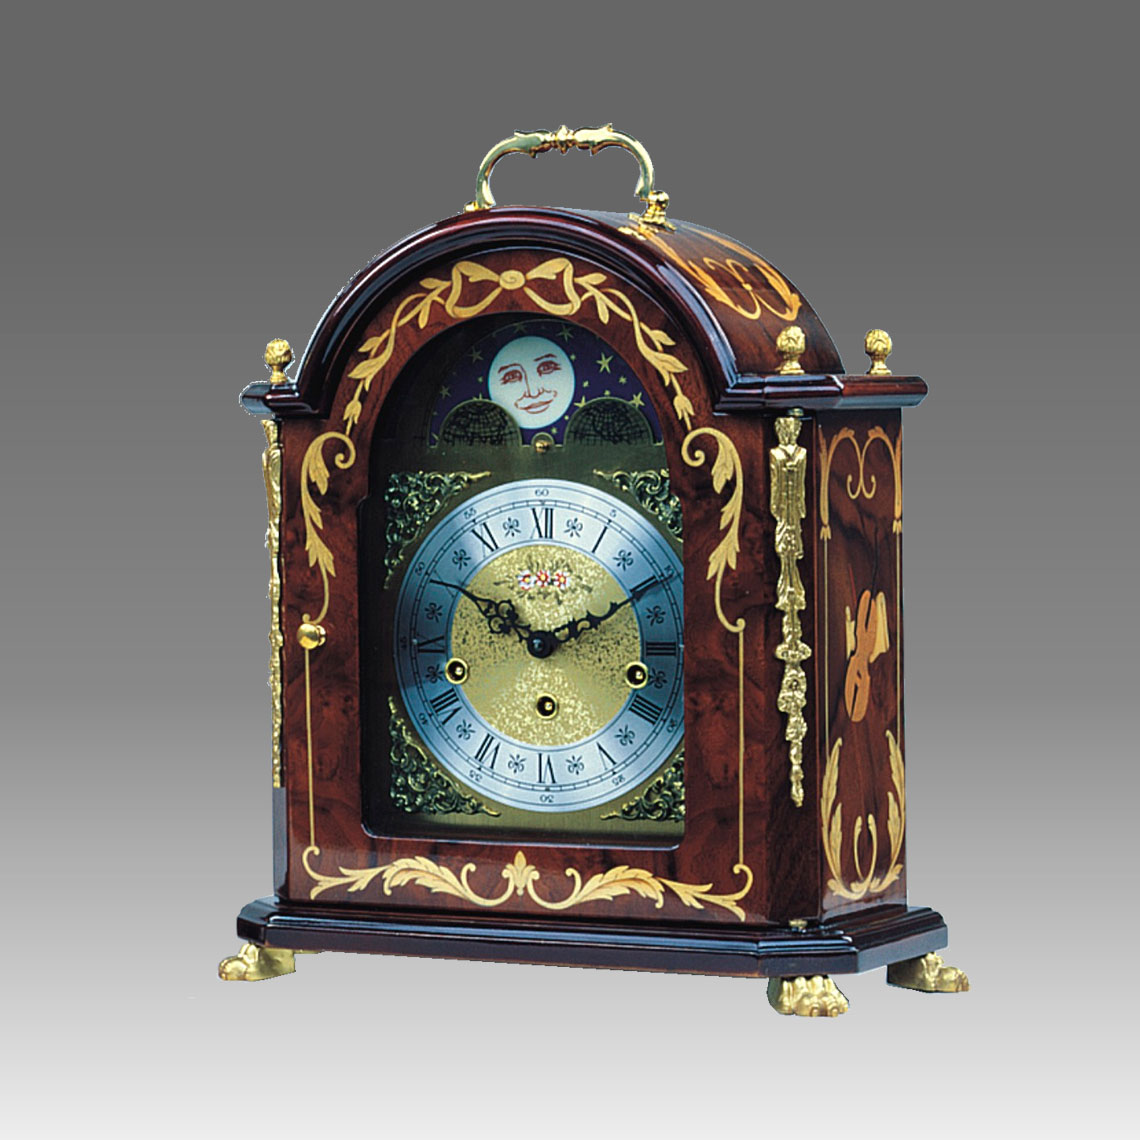 Mante Clock, Table Clock, Cimn Clock, Art.321/2 walnut Root Inaly - Westminster melody on rod gong, moon fase dial